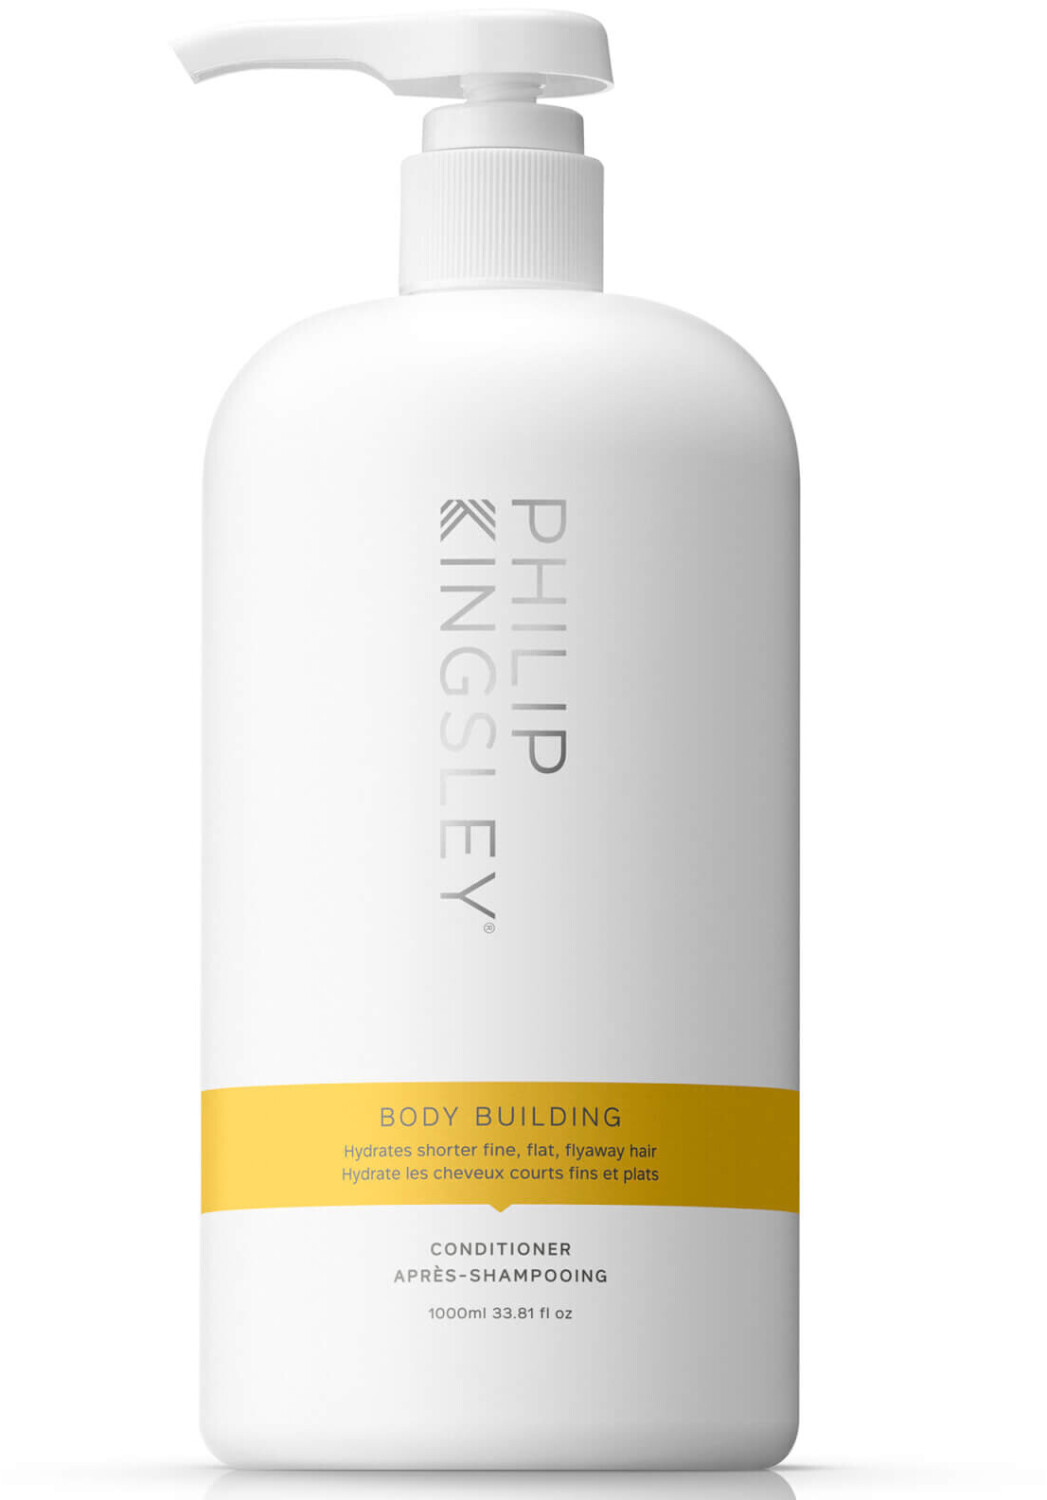 Photos - Hair Product Philip Kingsley Body Building Conditioner 1000ml 